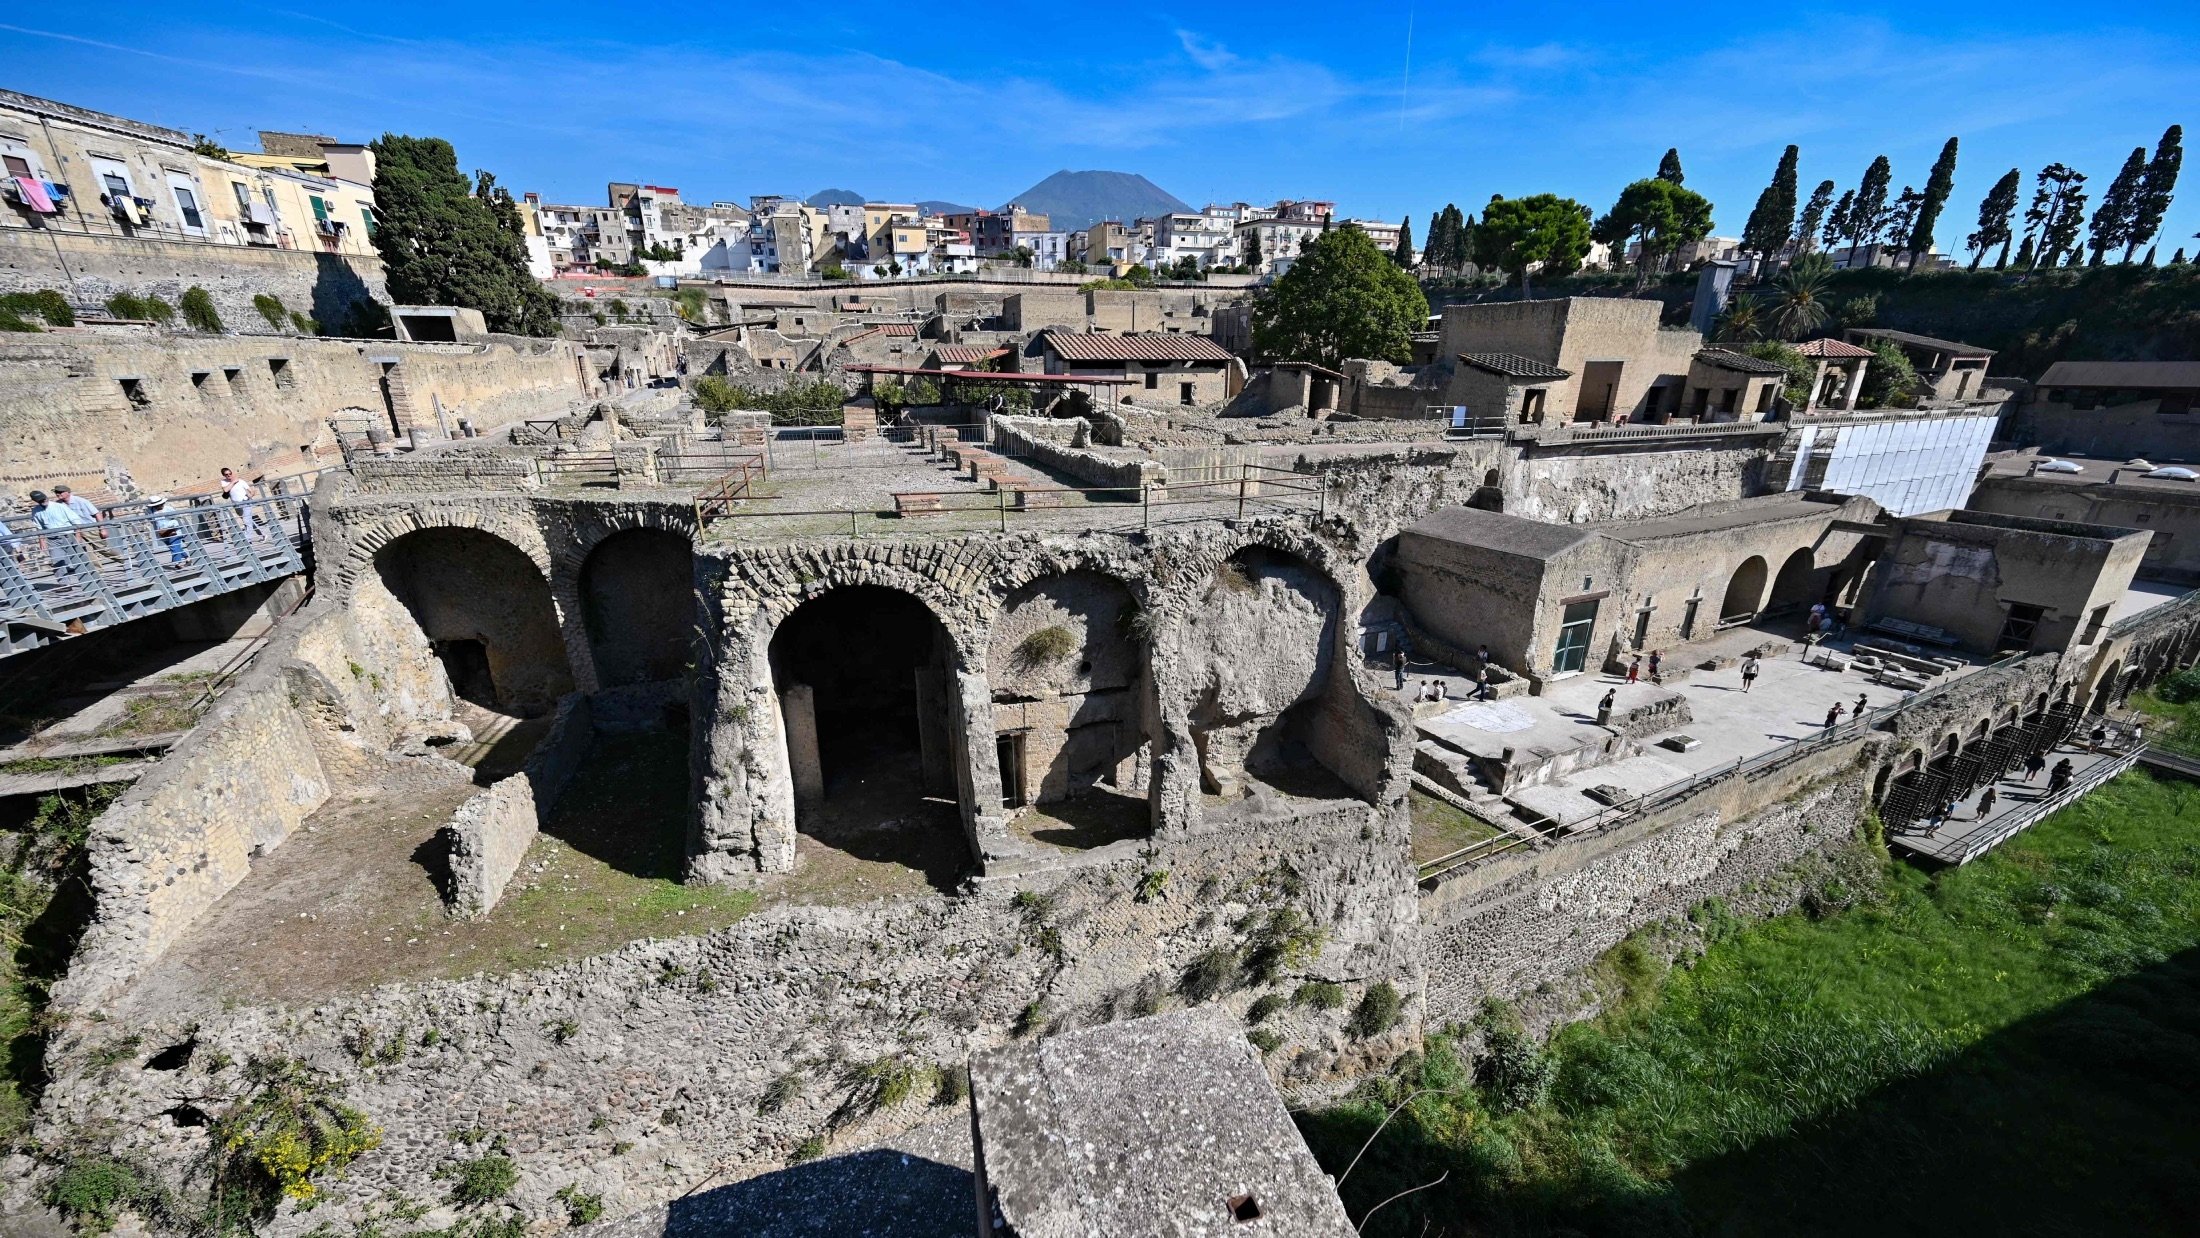 A general view shows the archaeological site of Herculaneum in Ercolano, near Naples, Italy, Oct. 23, 2019. (AFP Photo)